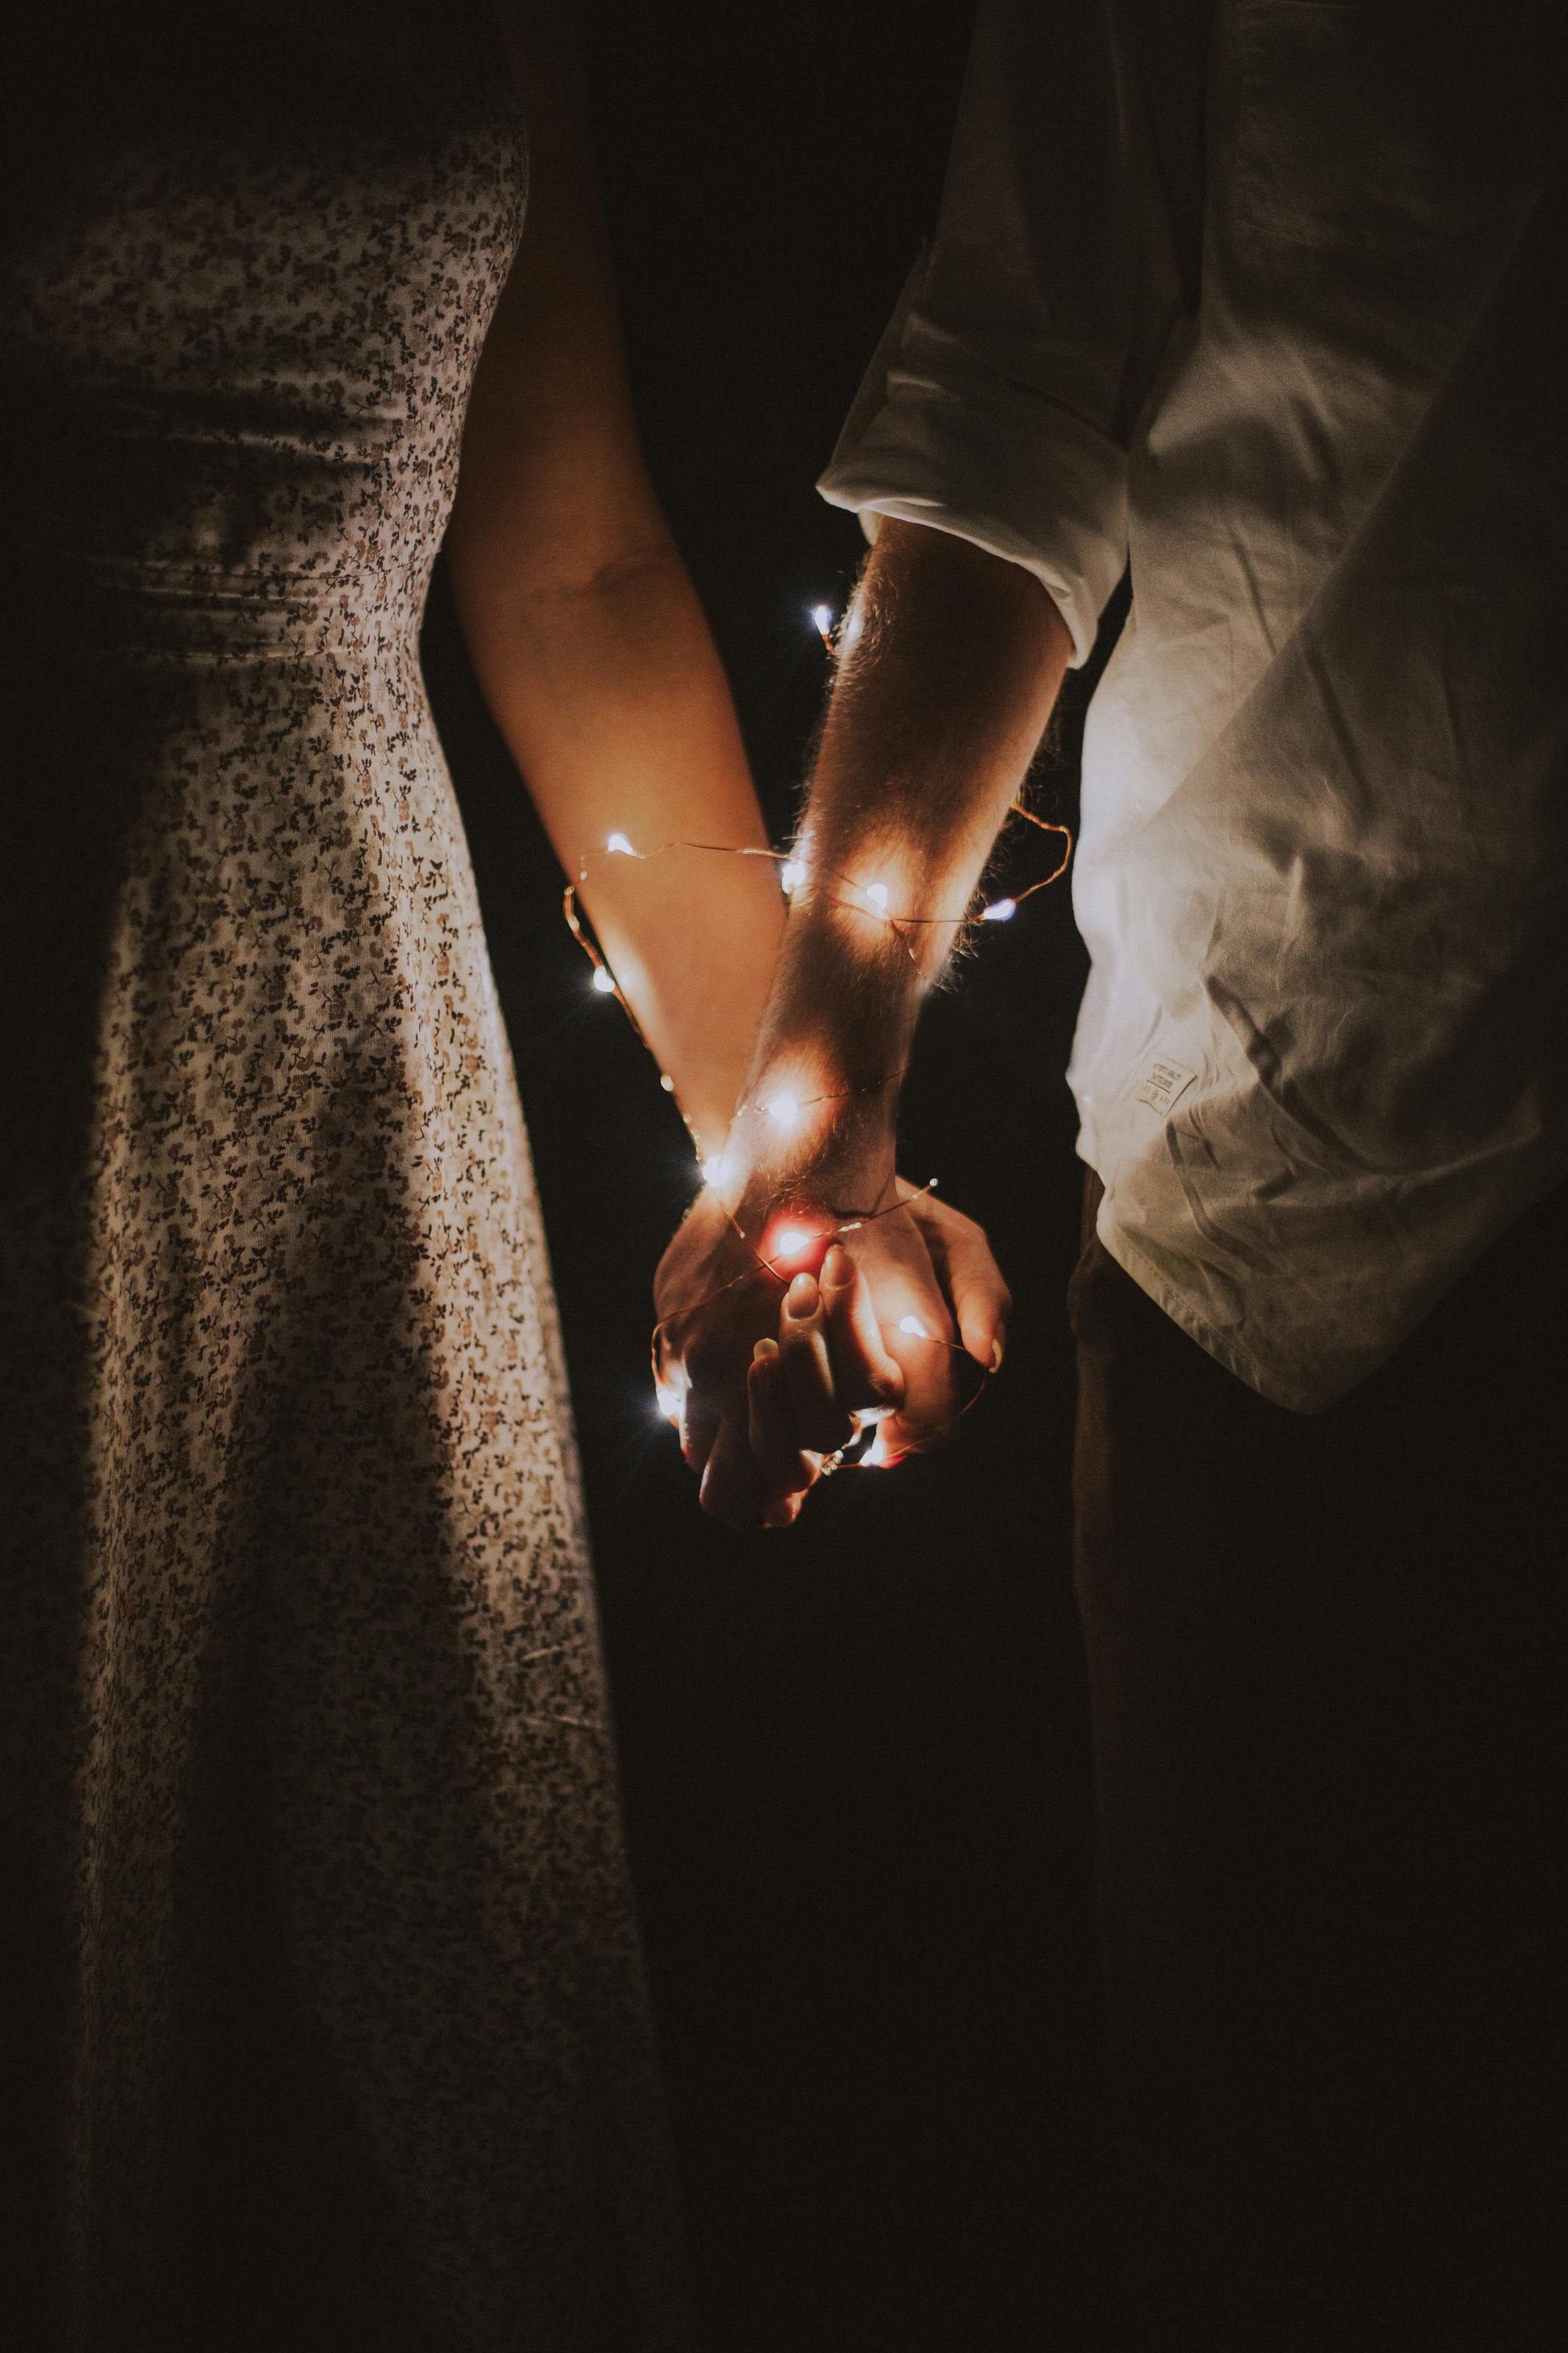 1000+ Great Holding Hands Photos · Pexels · Free Stock Photos